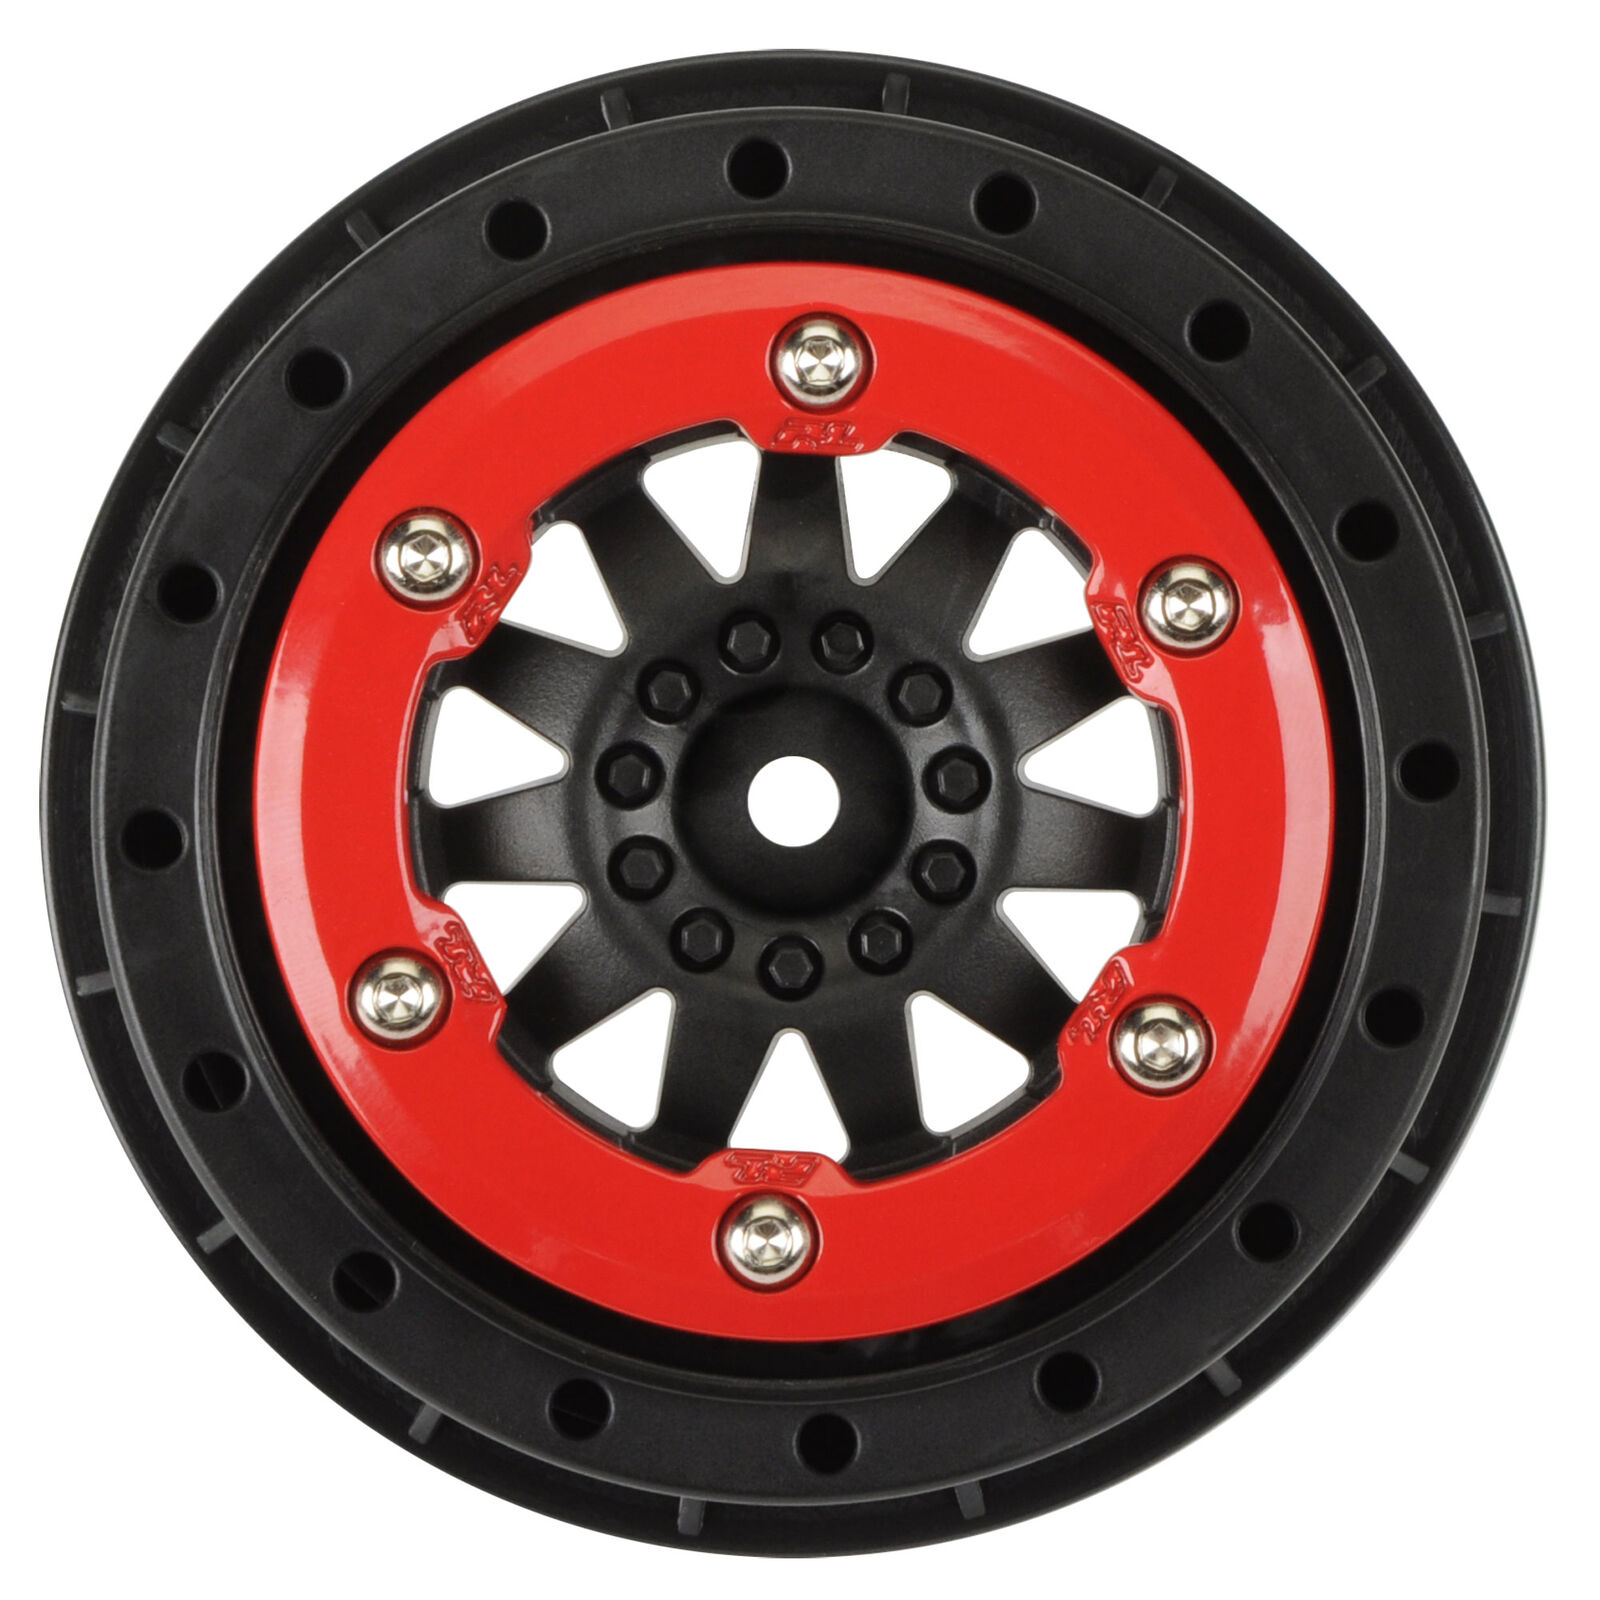 1/10 F-11 Front/Rear 2.2"/3.0" 12mm Short Course Wheels (2) Red/Blk